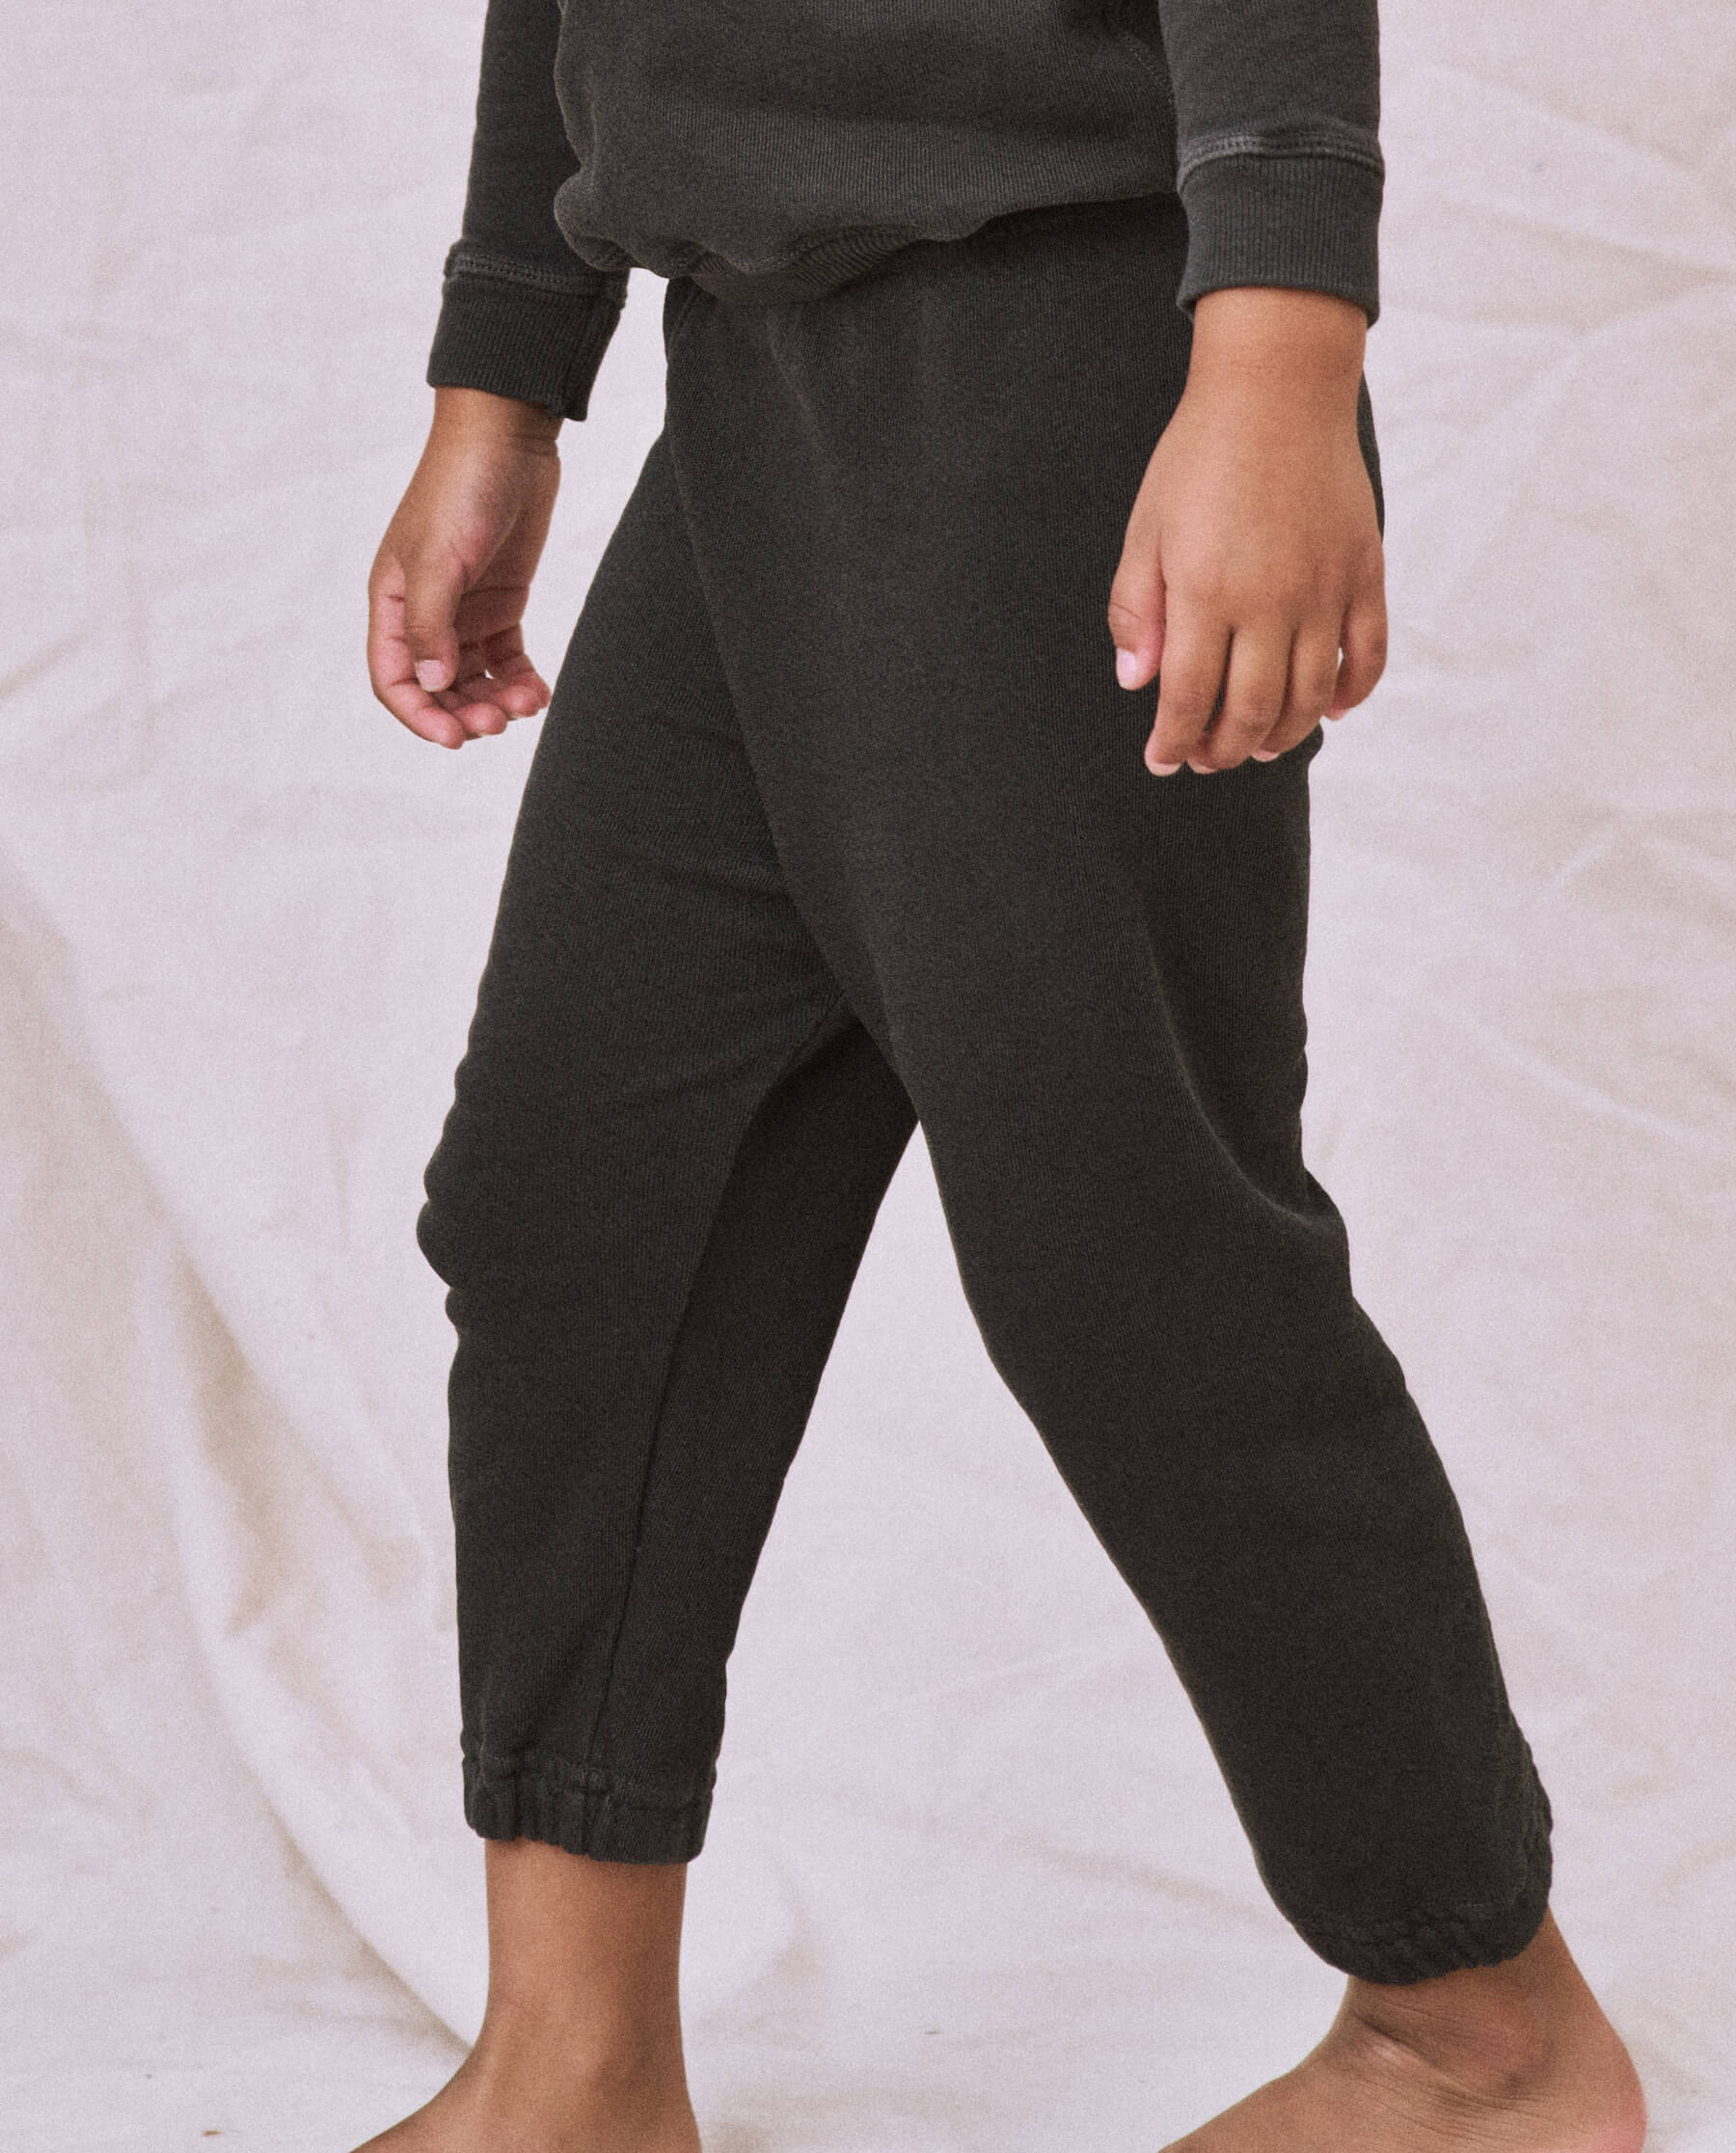 The Little Stadium Sweatpant. Solid -- Washed Black SWEATPANTS THE GREAT. SP22 D2 LITTLE